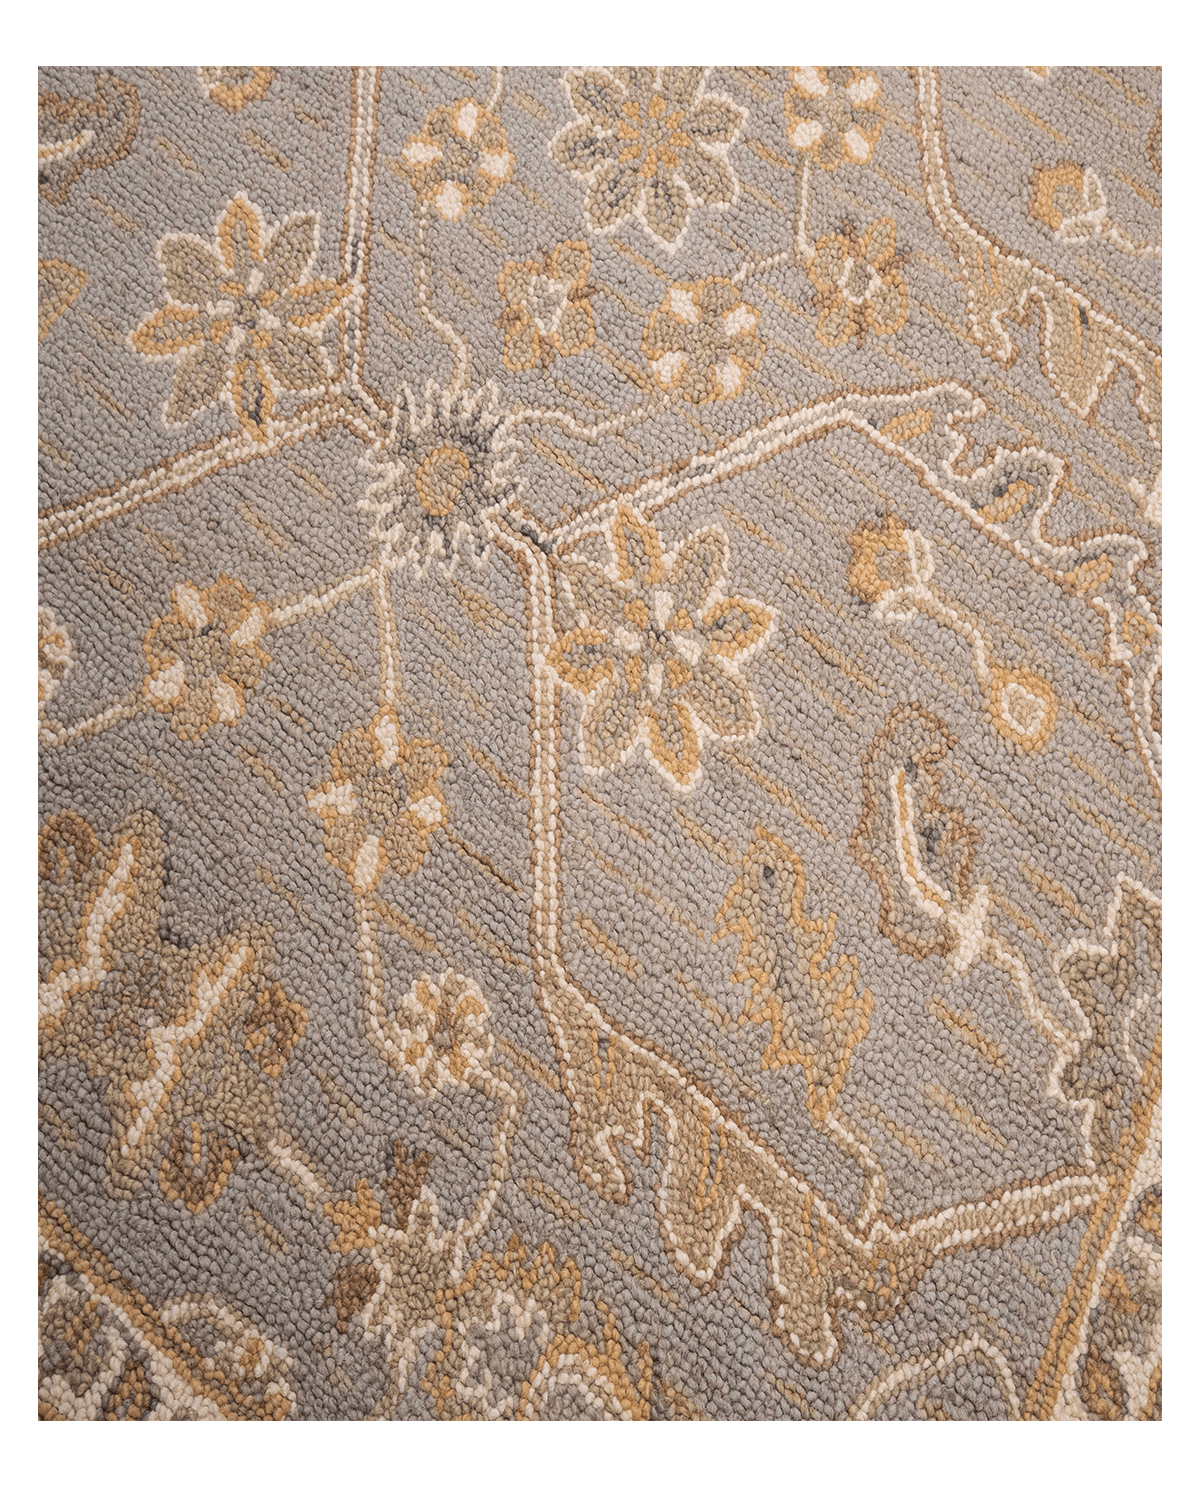 Traditional Hand-tufted Rug (FR-TF-108-22)